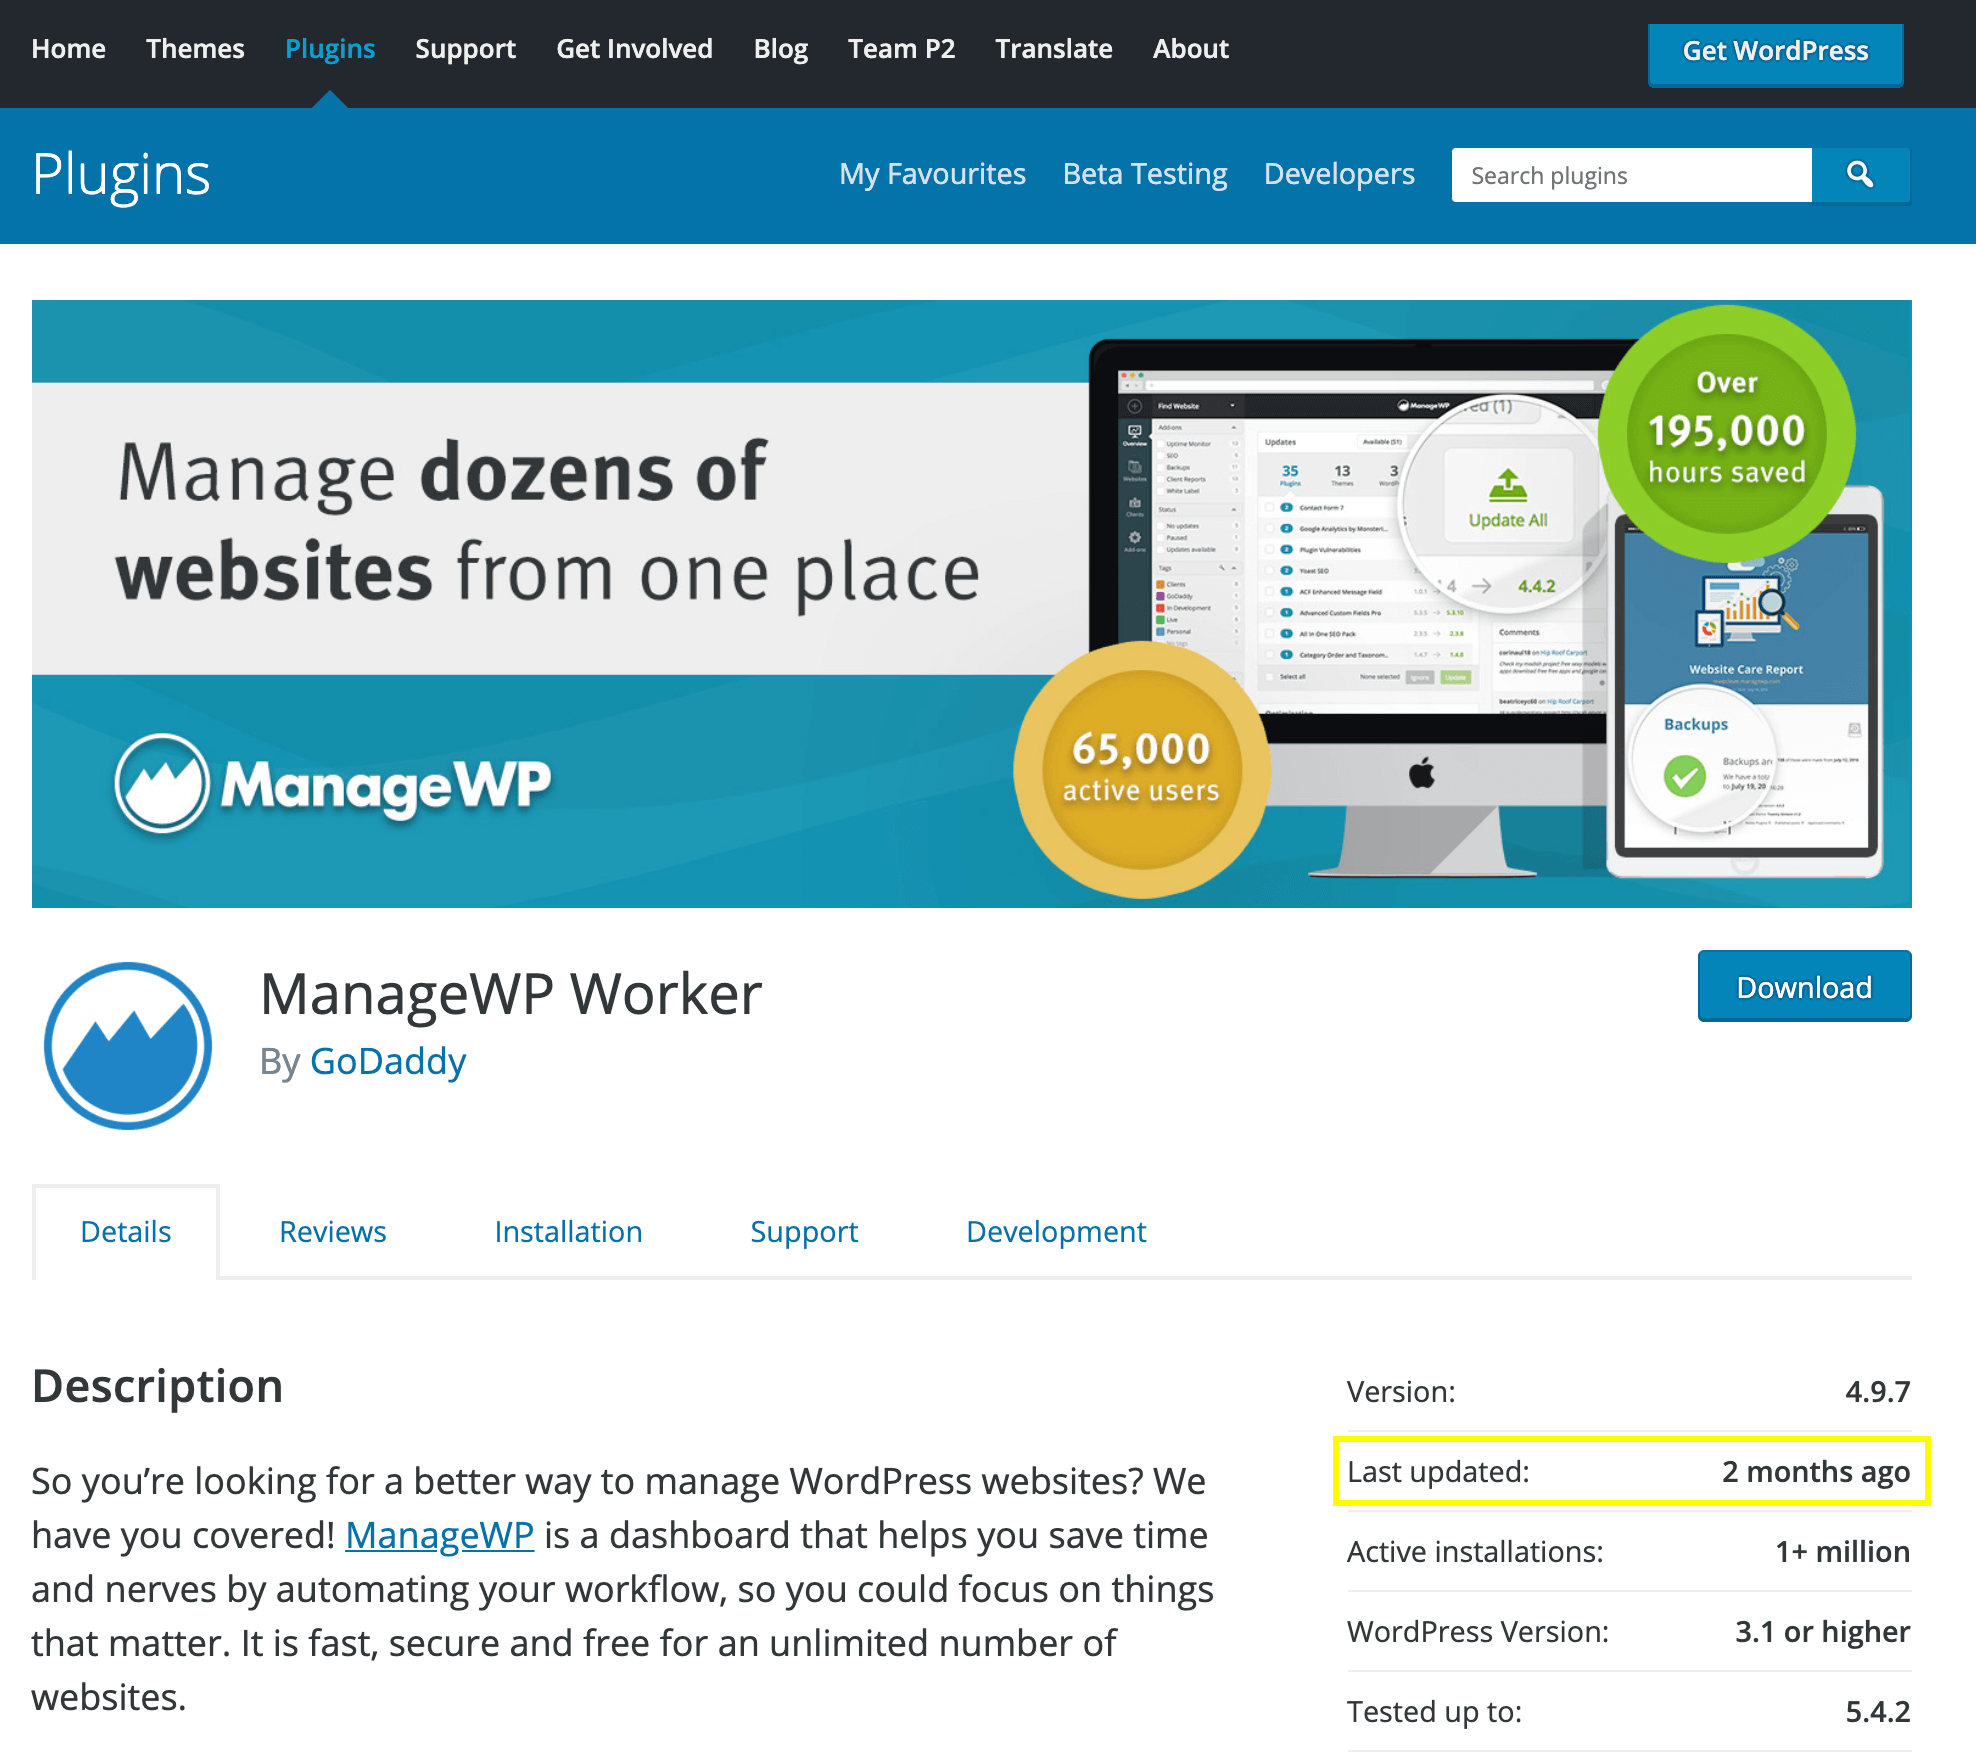 The ManageWP plugin in the official WordPress Plugin Directory.